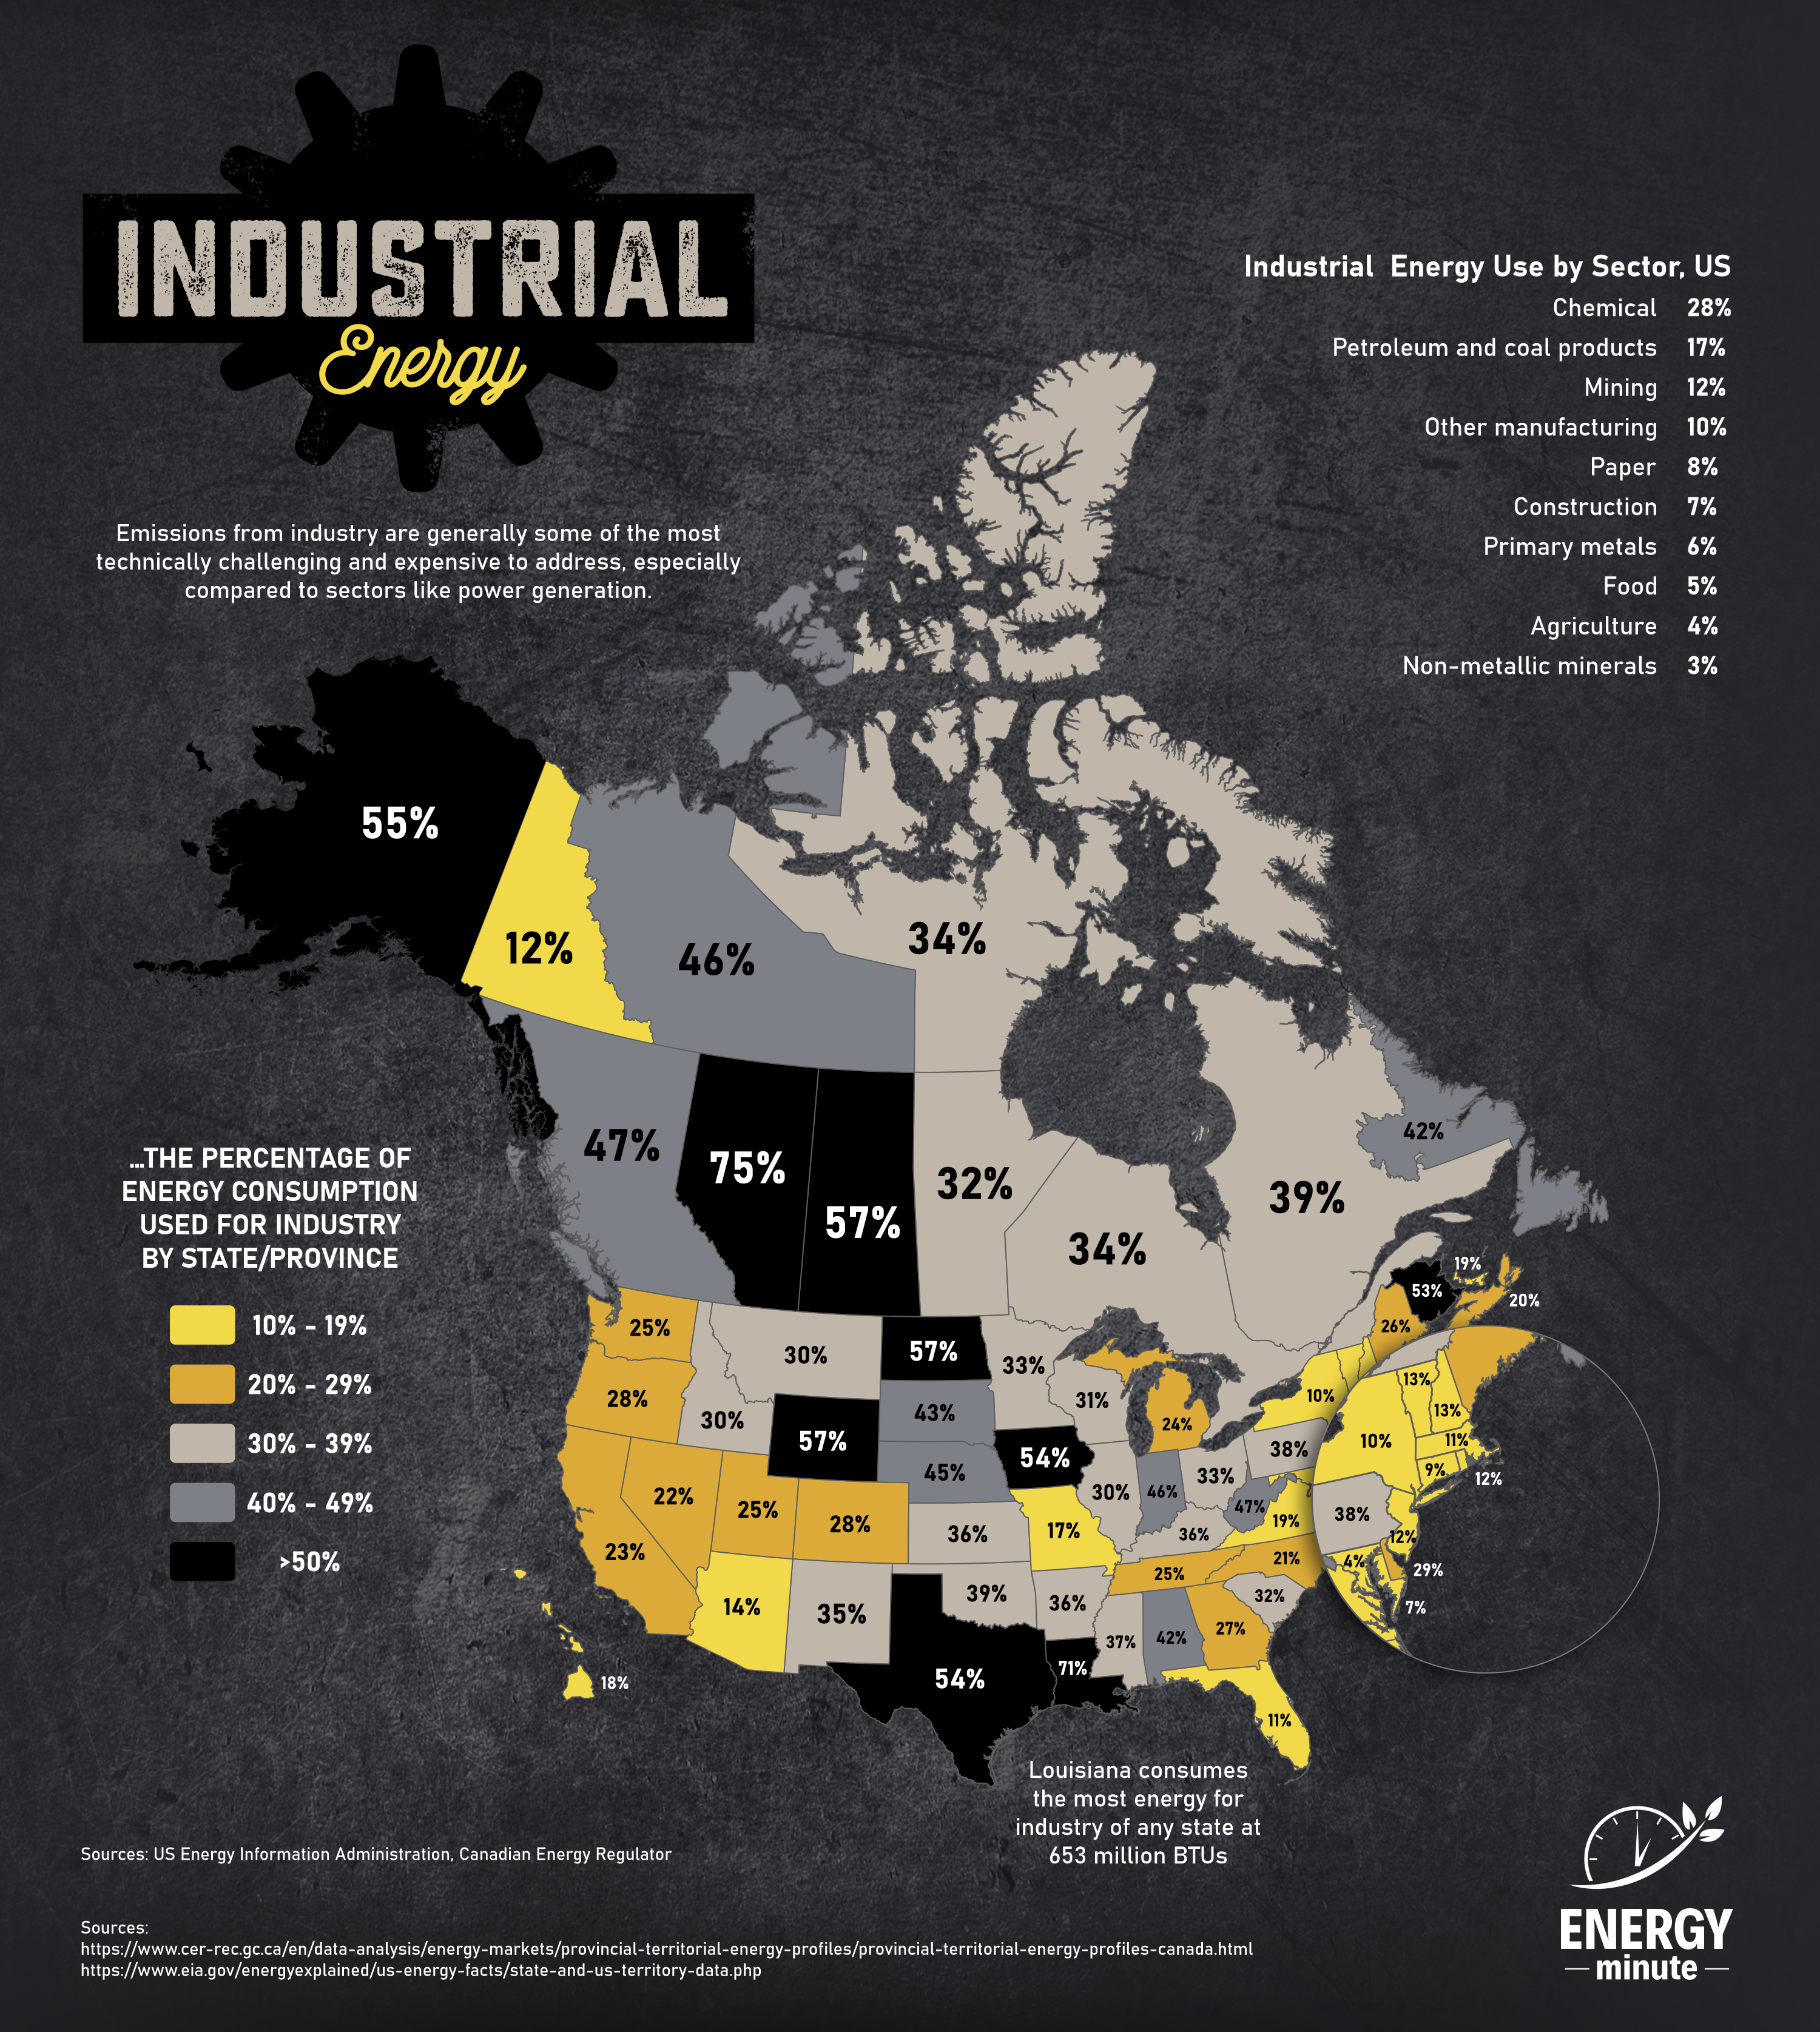 Industrial Energy Use by Province/State